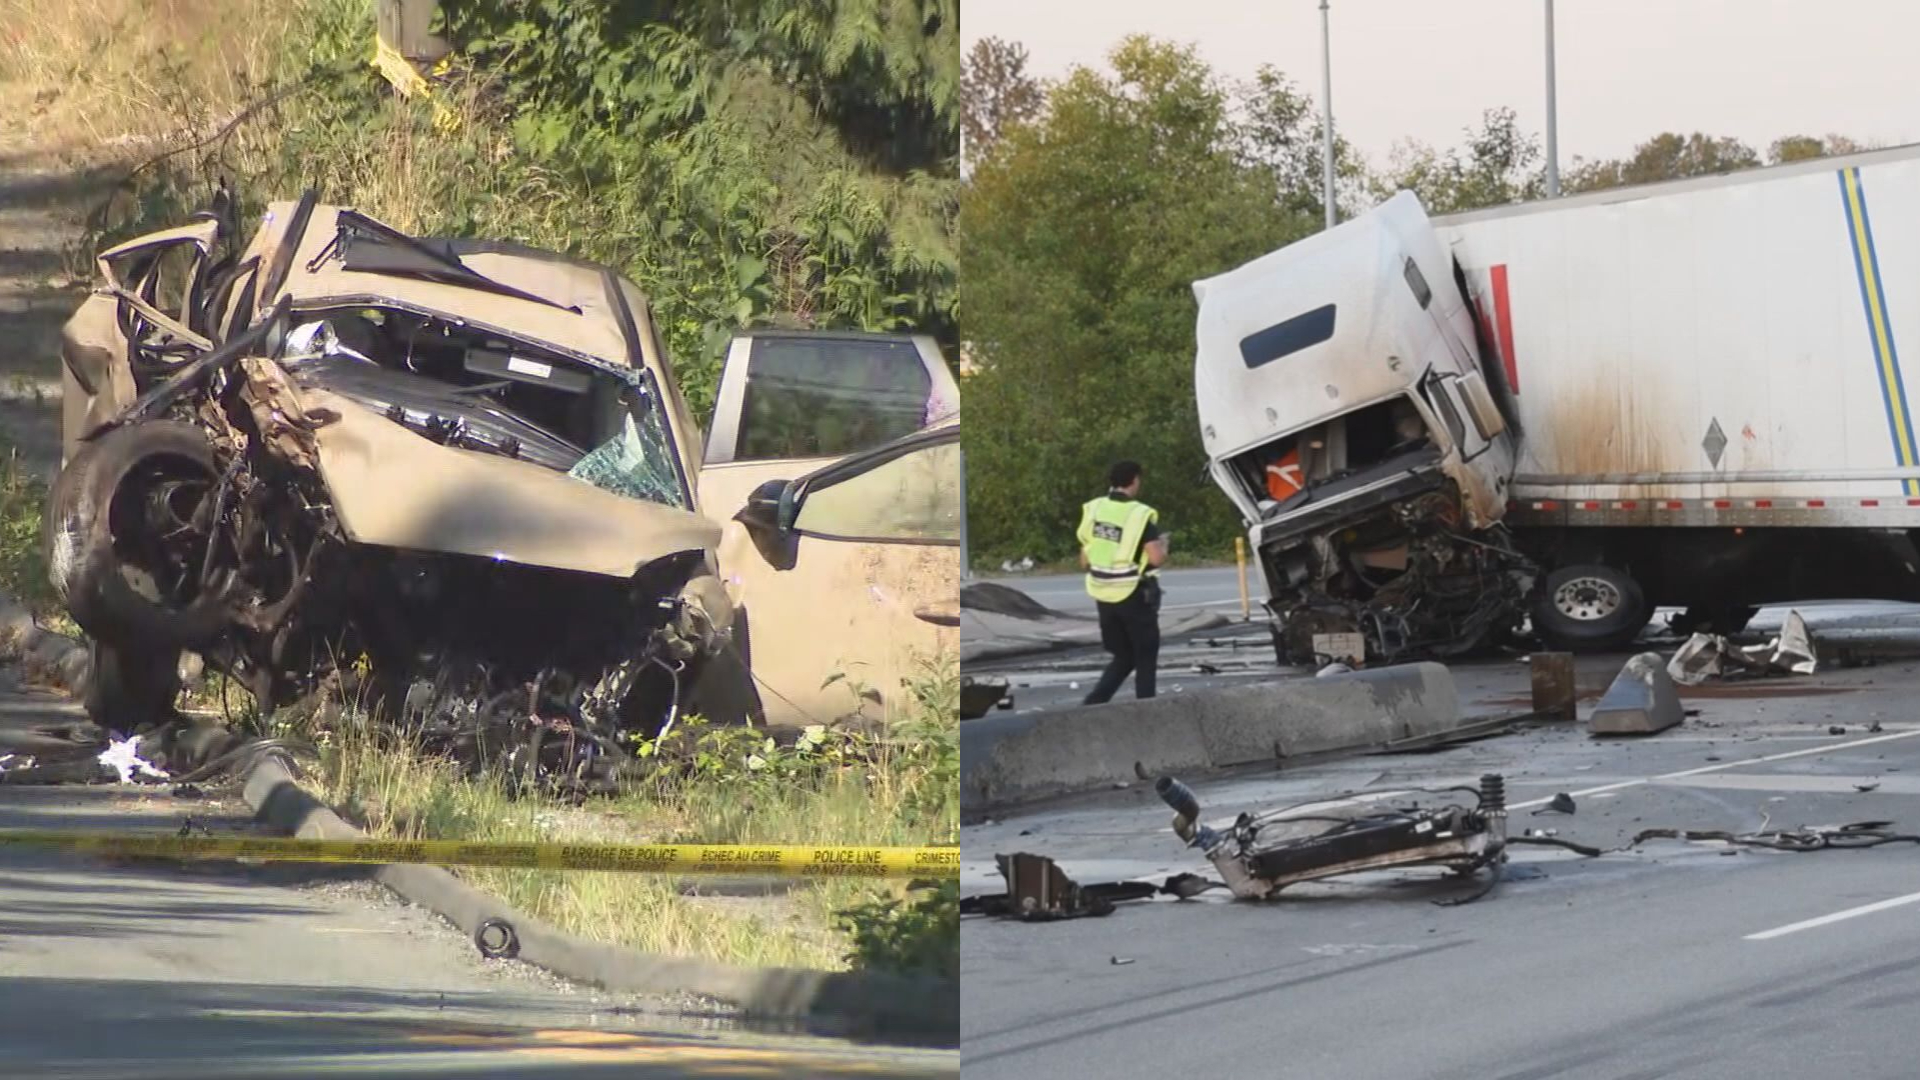 Two serious collisions in Metro Vancouver